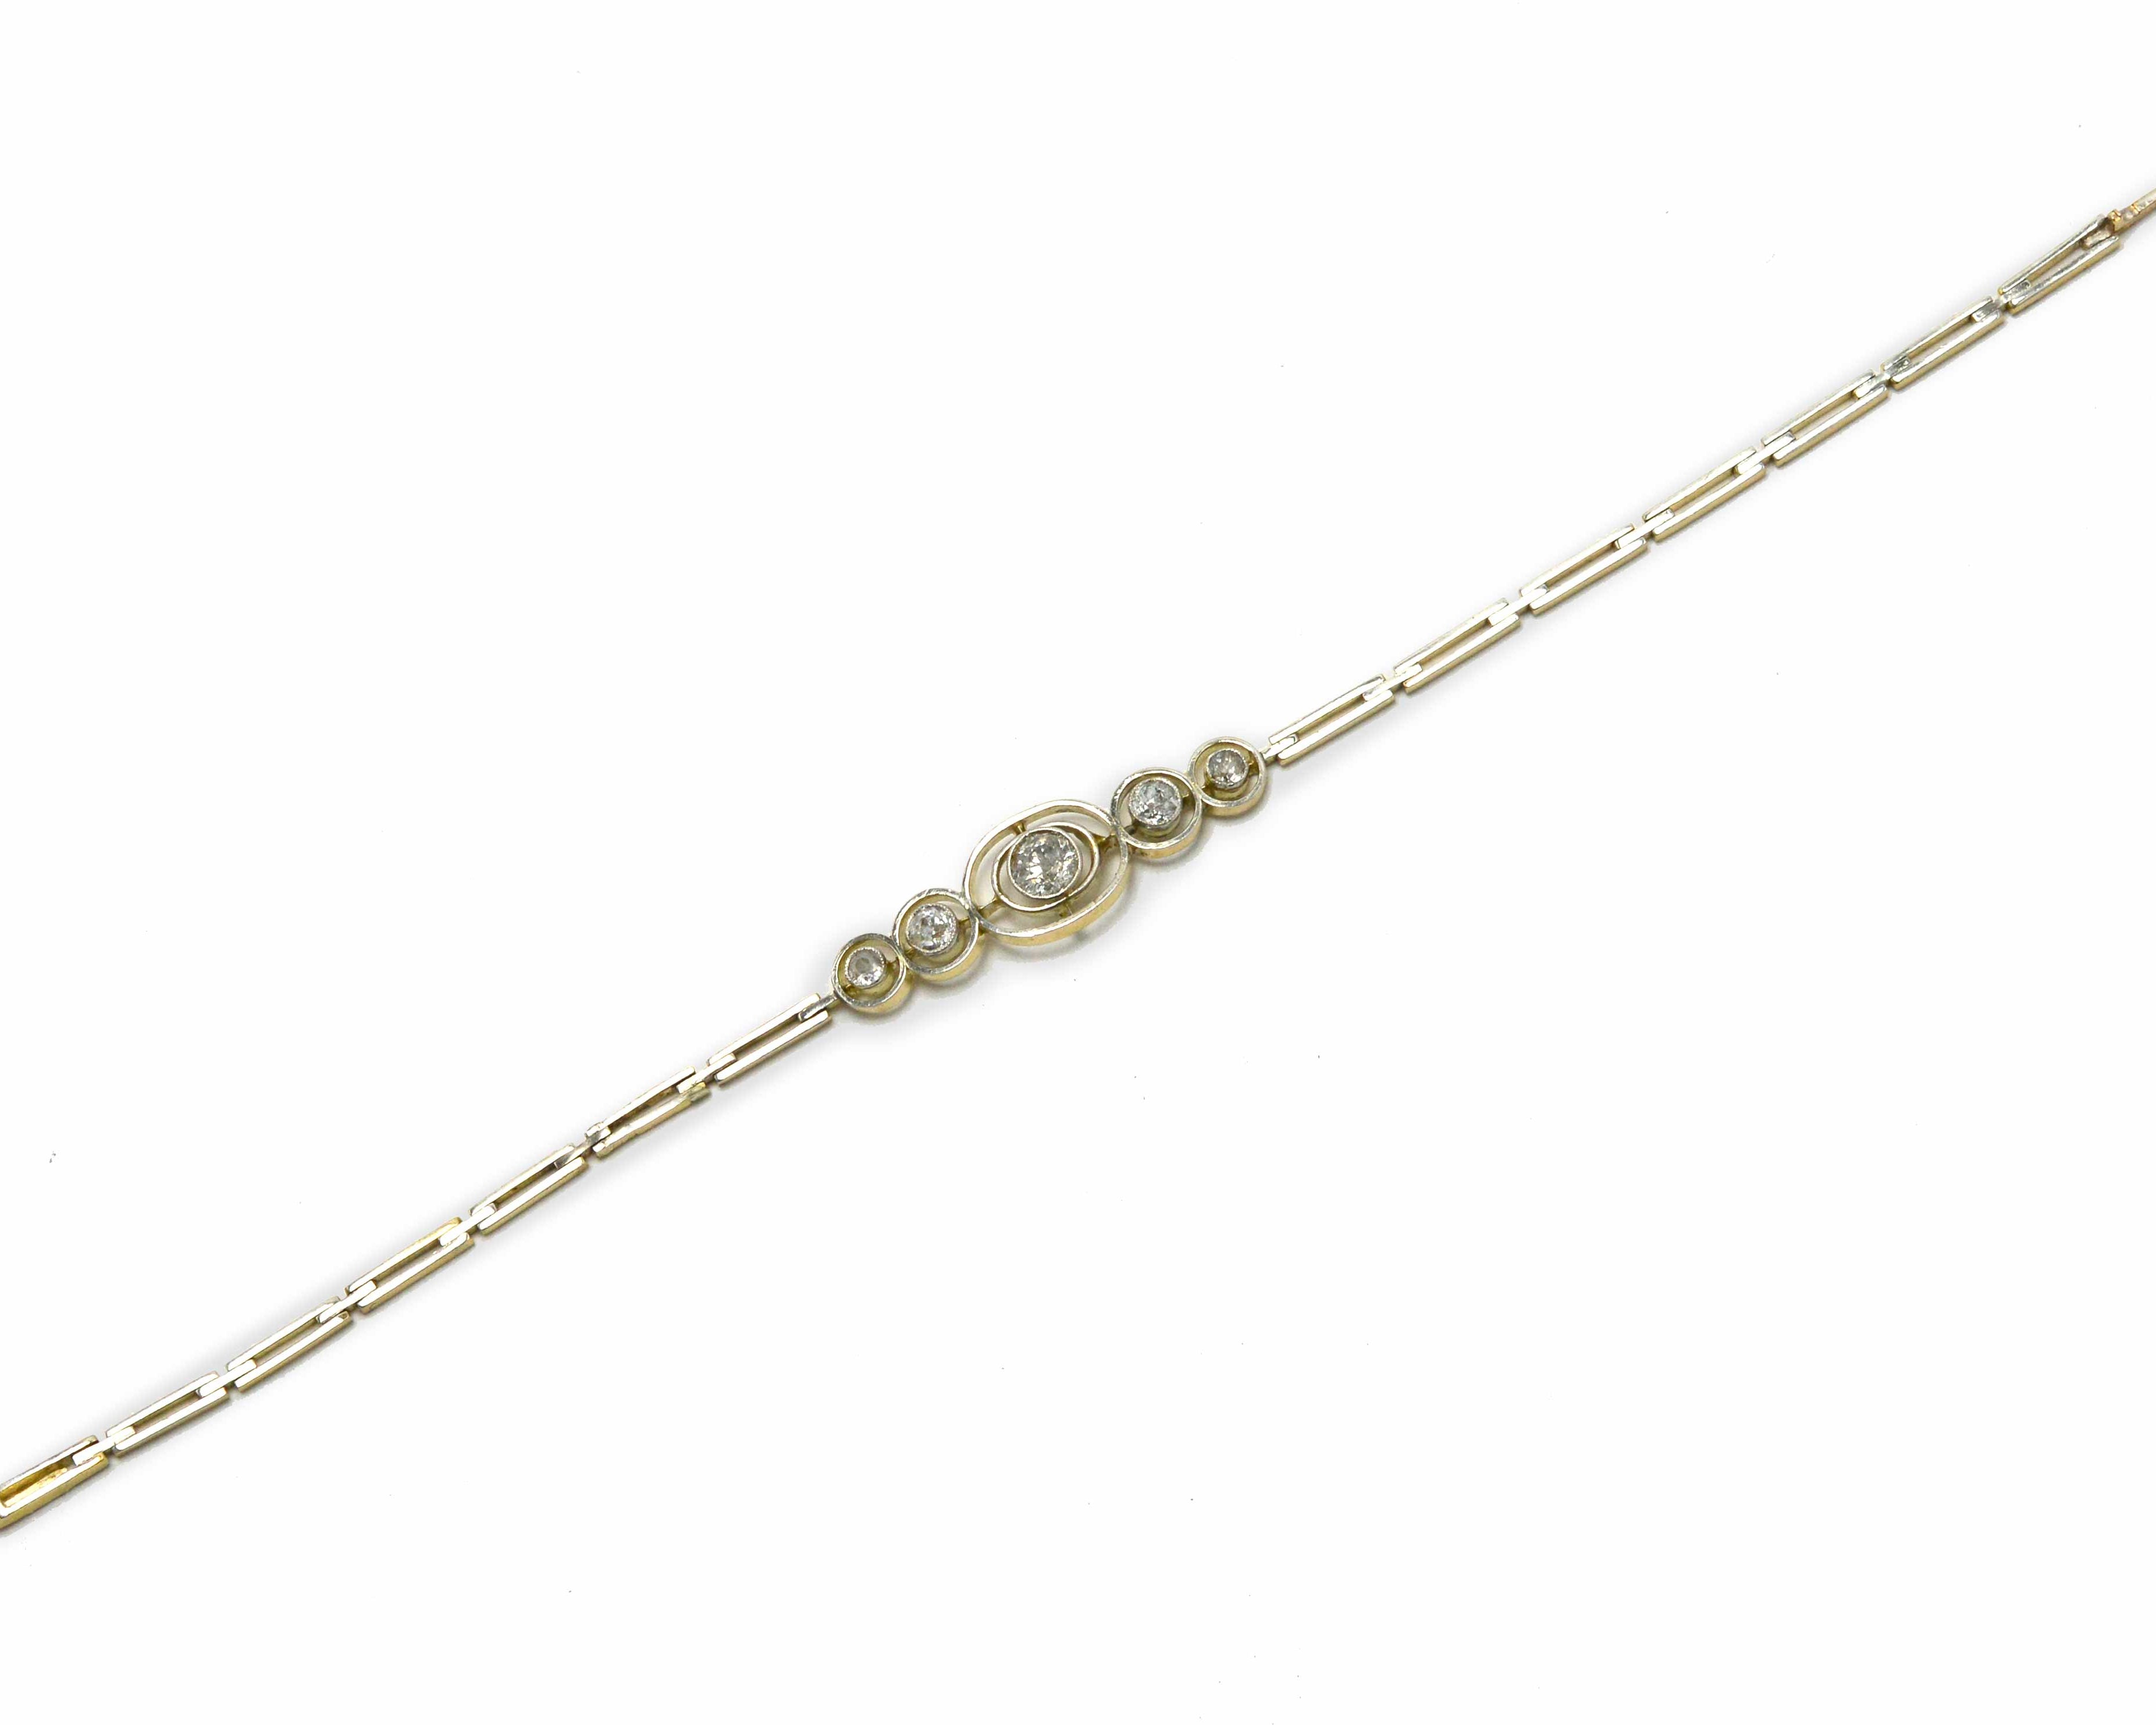 Concentric bezel settings of platinum 5 fiery hand-cut old mine diamonds are set in this bracelet.